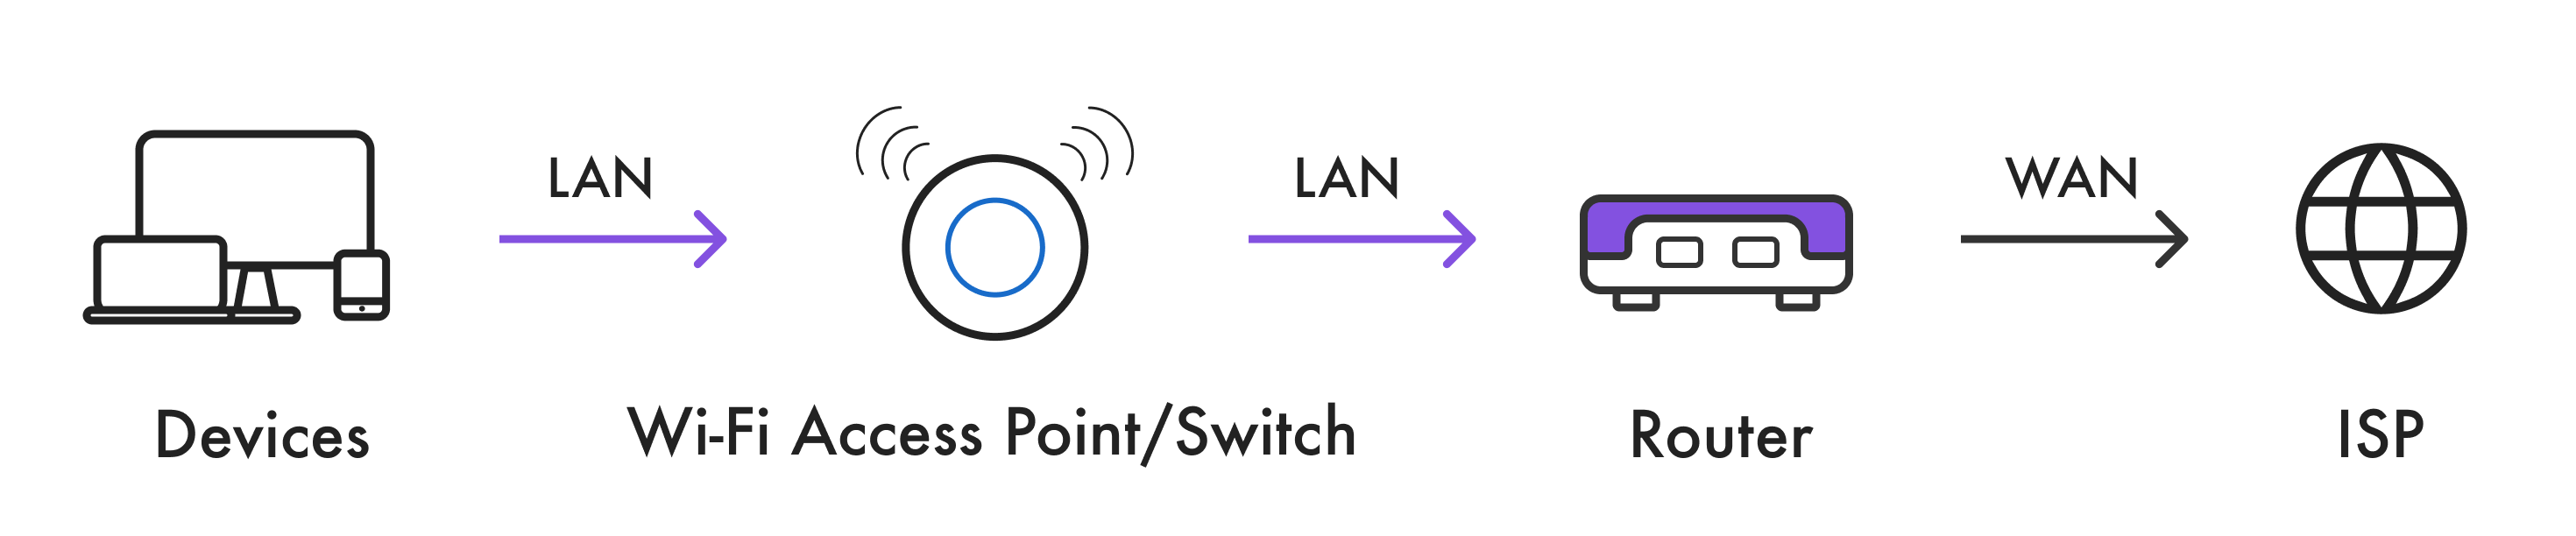 Test packet loss diagram with Devices, LAN right directional arrow, Wi-Fi Access Point/Switch, LAN right directional arrow, Firewalla Purple router box, WAN right directional arrow, ISP Globe Icon.